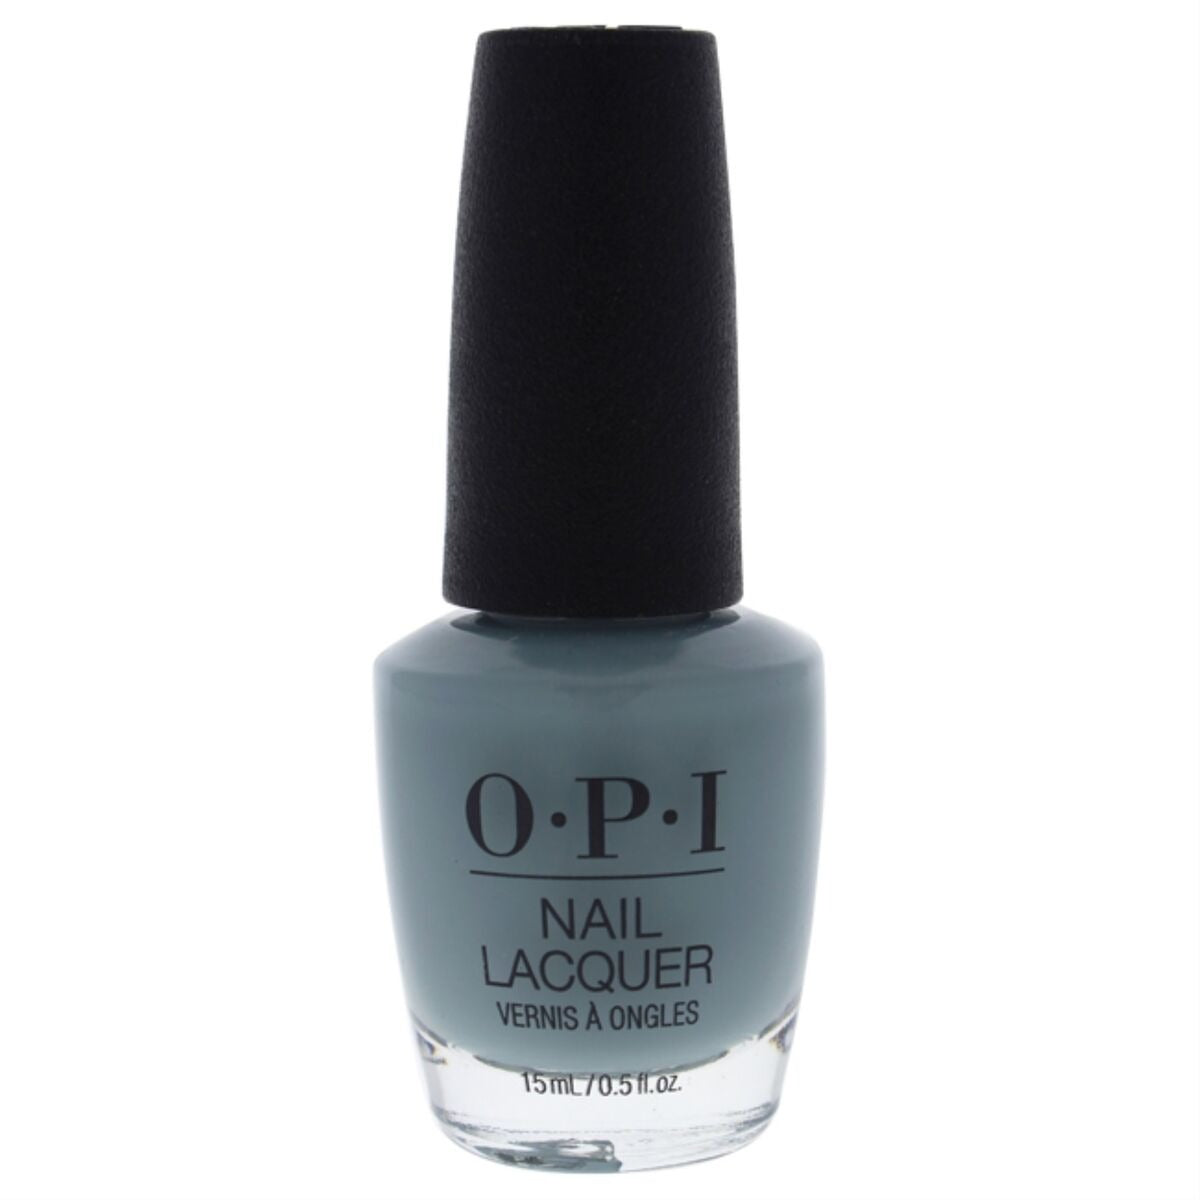 Nail Lacquer - NL SH6 Ring Bare-er by OPI for Women - 0.5 oz Nail Polish - Pack of 3